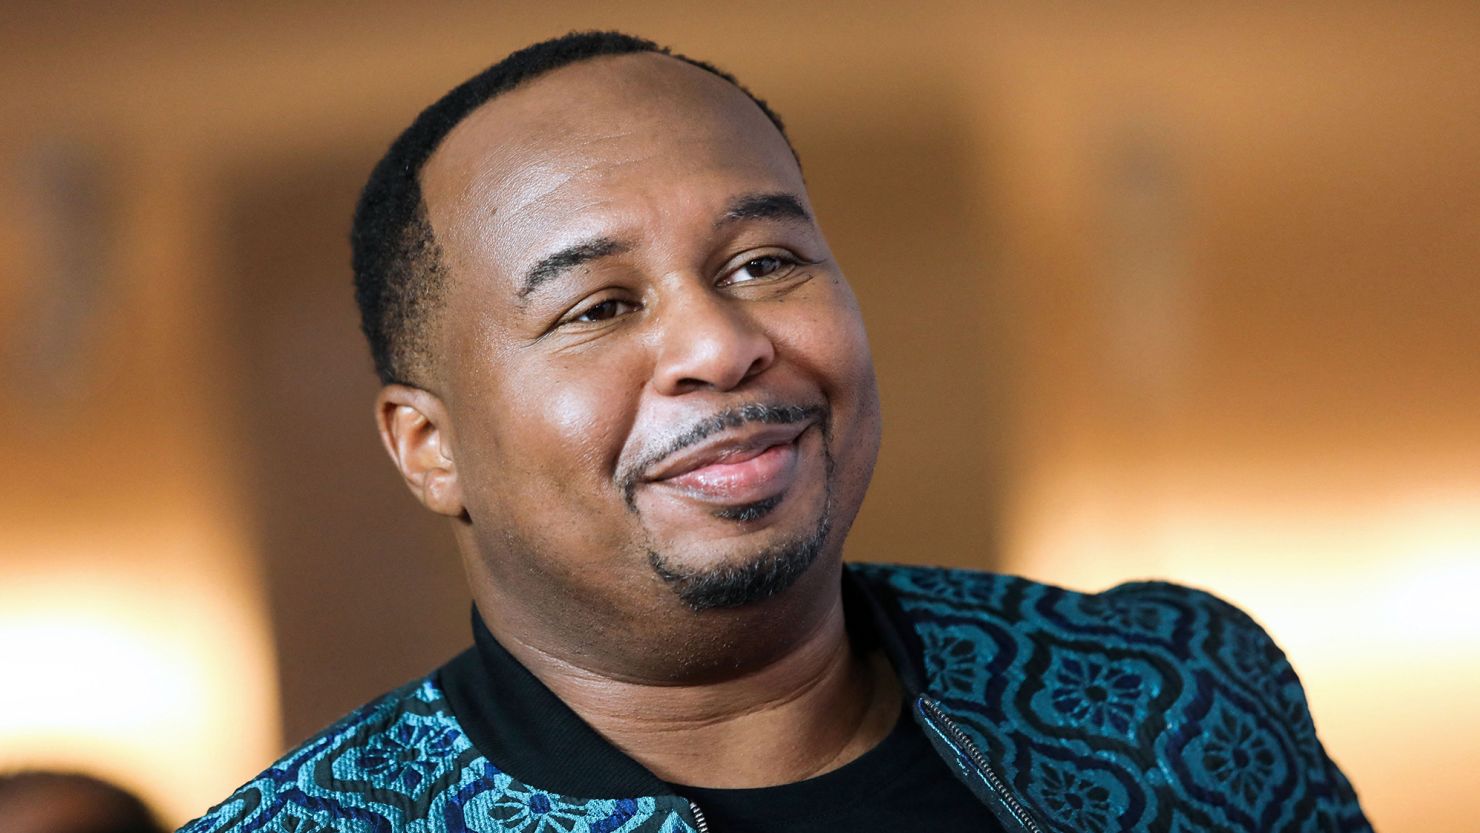 US actor Roy Wood Jr. arrives for the special screening of "Confess, Fletch" in West Hollywood, California on September 7, 2022.